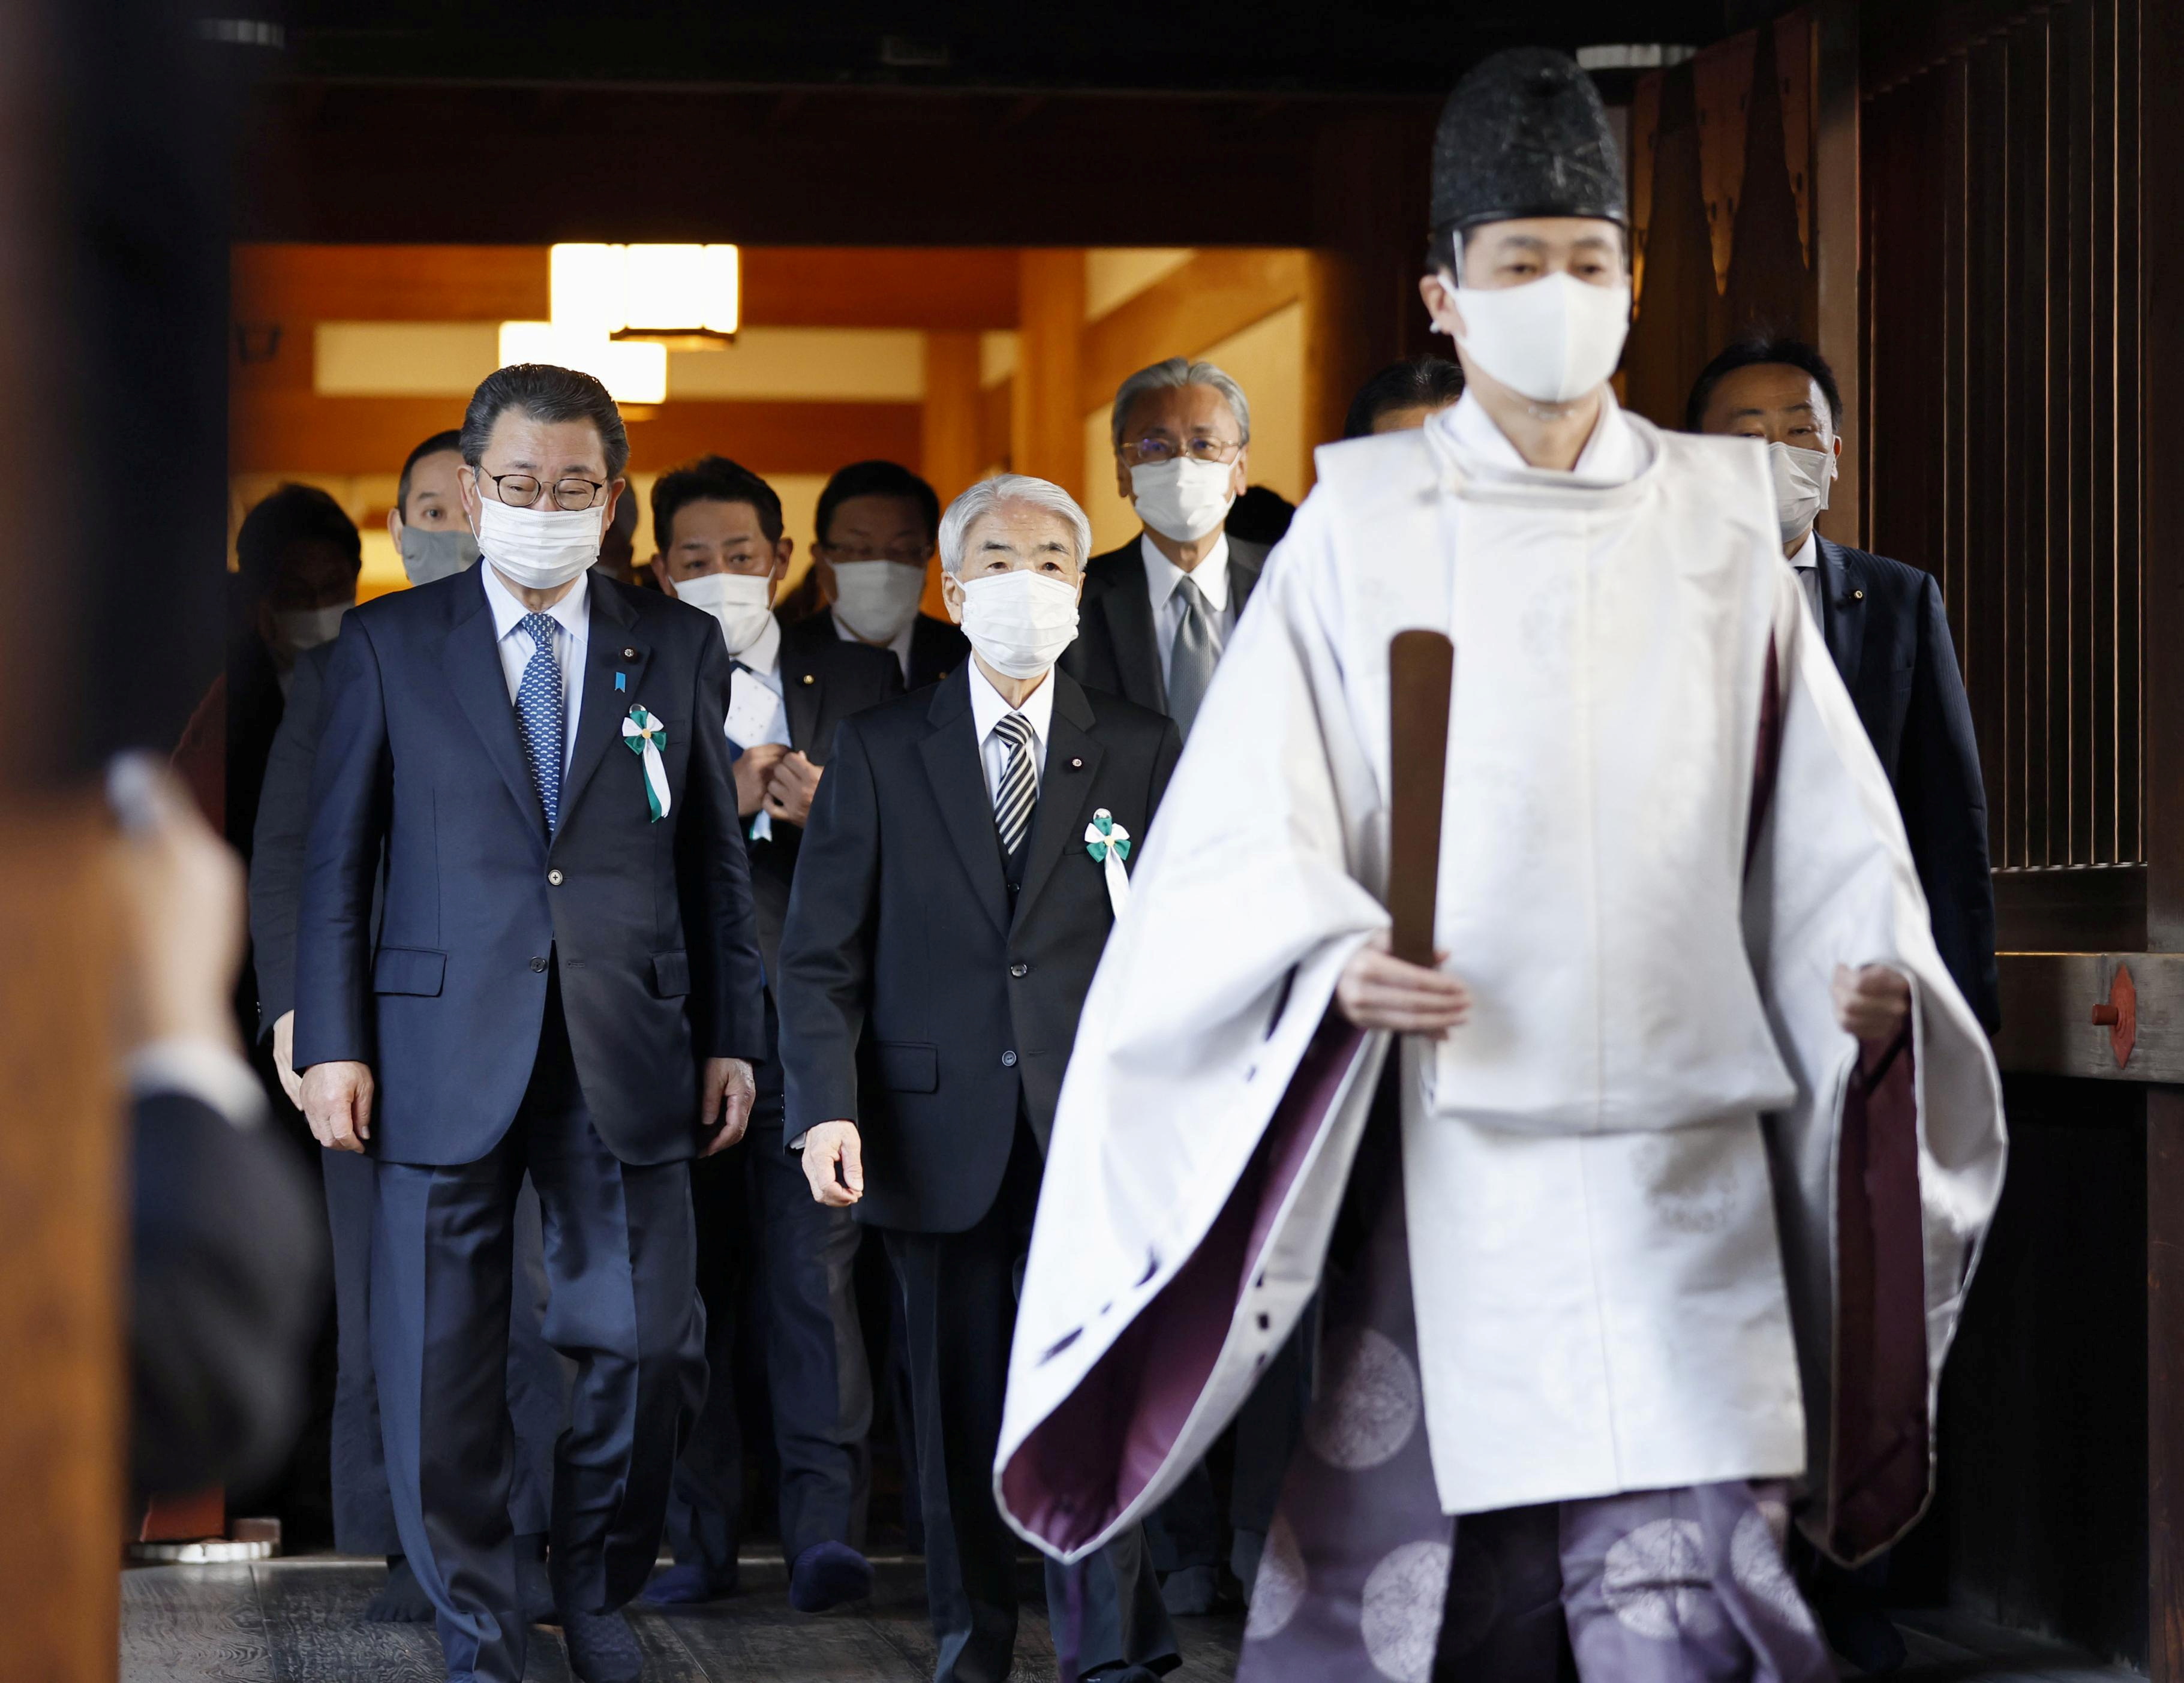 A Shinto priest accompanies a group of Japanese lawmakers as they visit the Yasukuni shrine to pay respects to the country's war dead in Tokyo